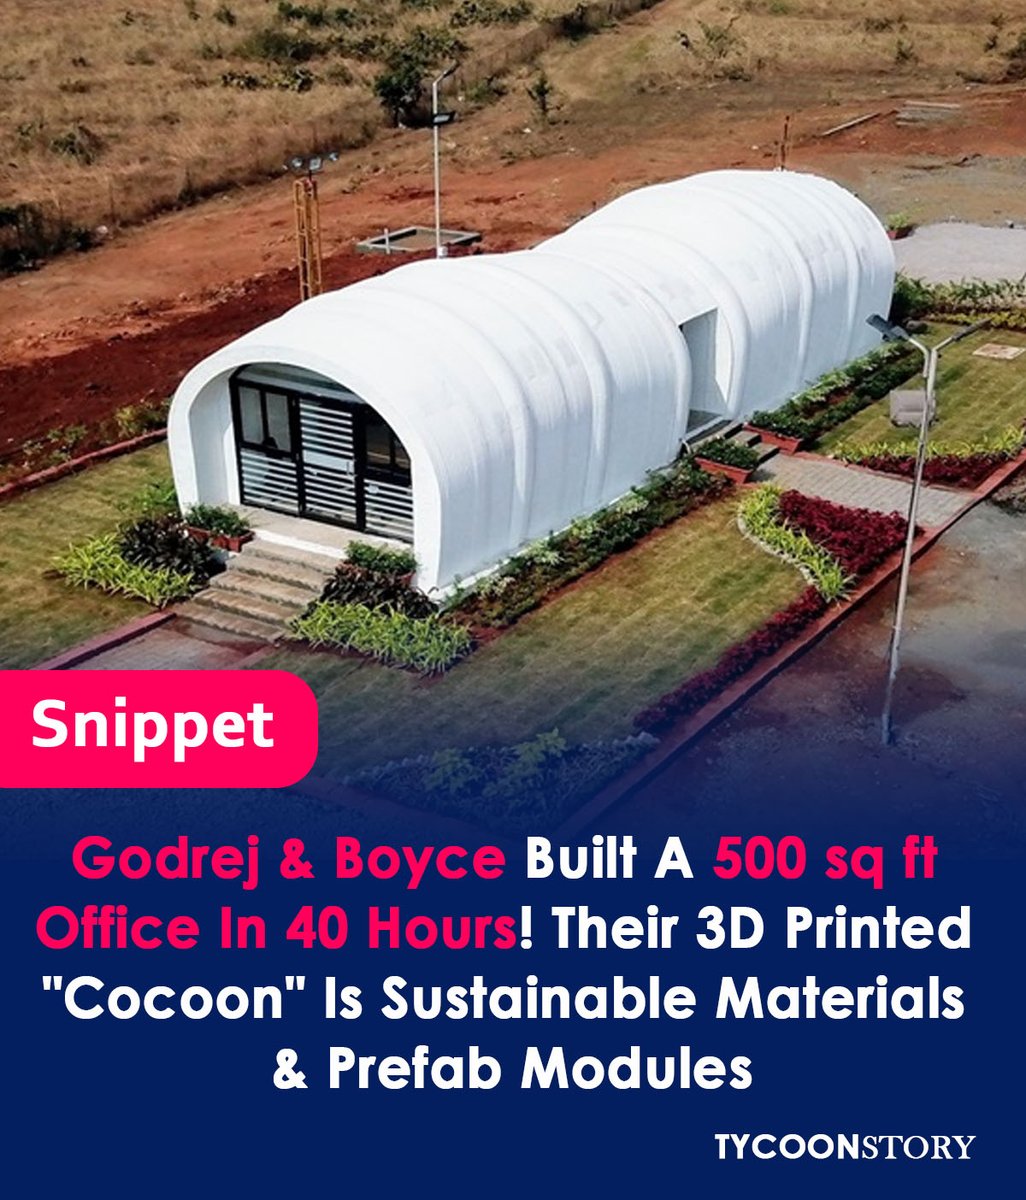 Godrej & Boyce built a 500 sq ft office in 40 hours! Their 3D-printed 'Cocoon' is sustainable materials & prefab modules
#3Dprintingrevolution #constructioninnovation #sustainablebuilding #GodrejBoyce #TheCocoon #greenconstruction #recycledmaterials  #ecofriendlybuild